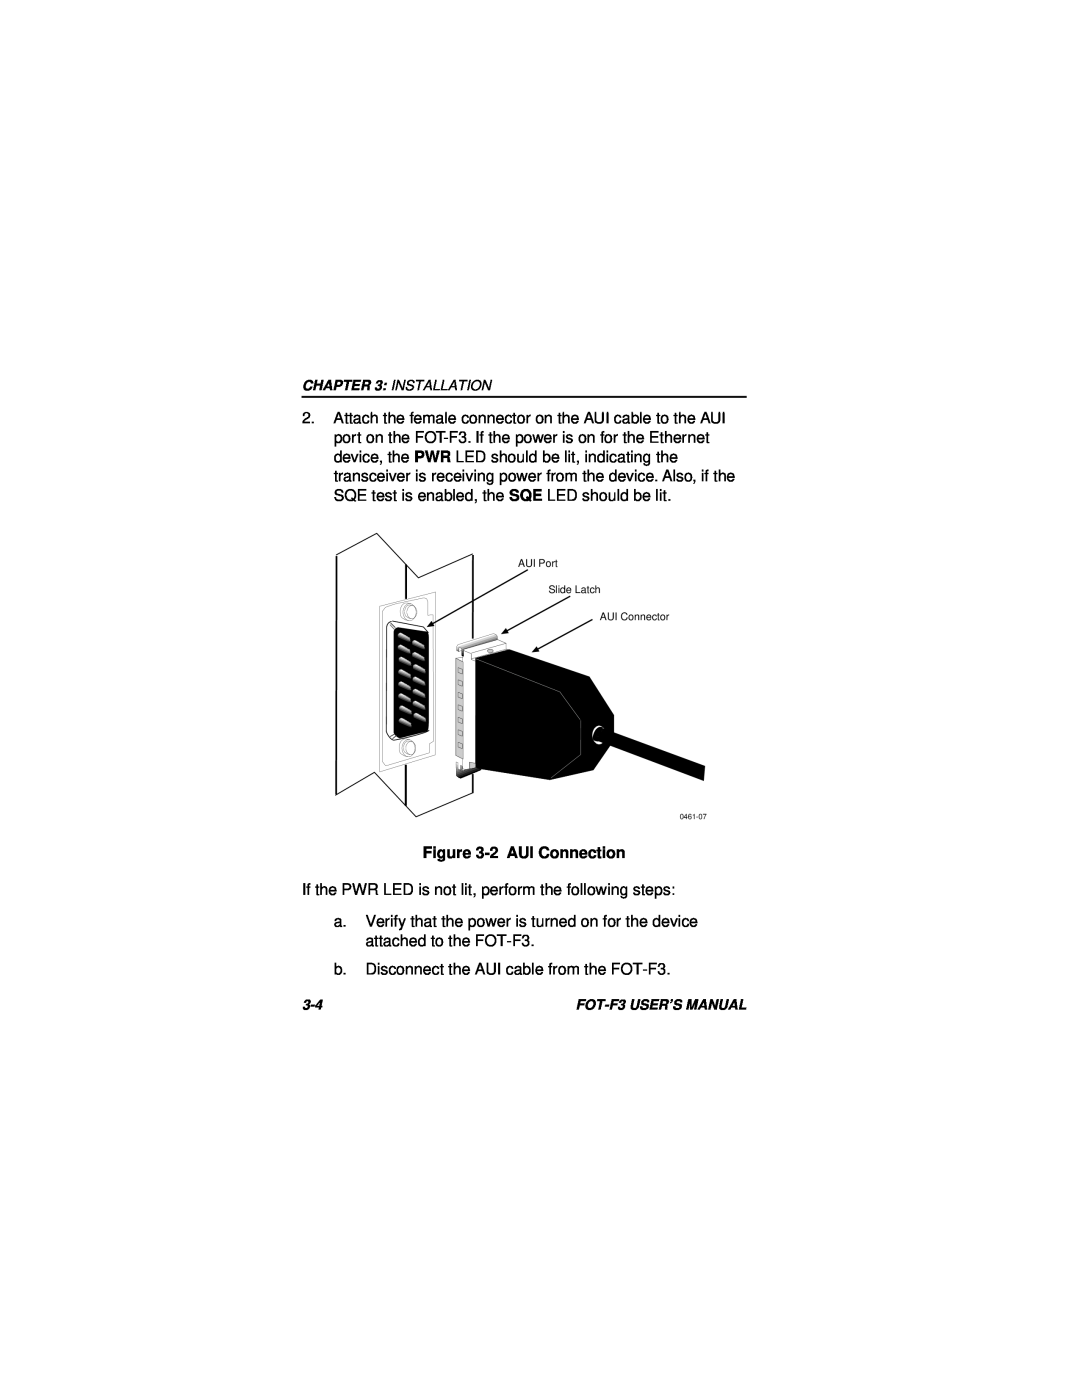 Cabletron Systems F3 user manual 2 AUI Connection 